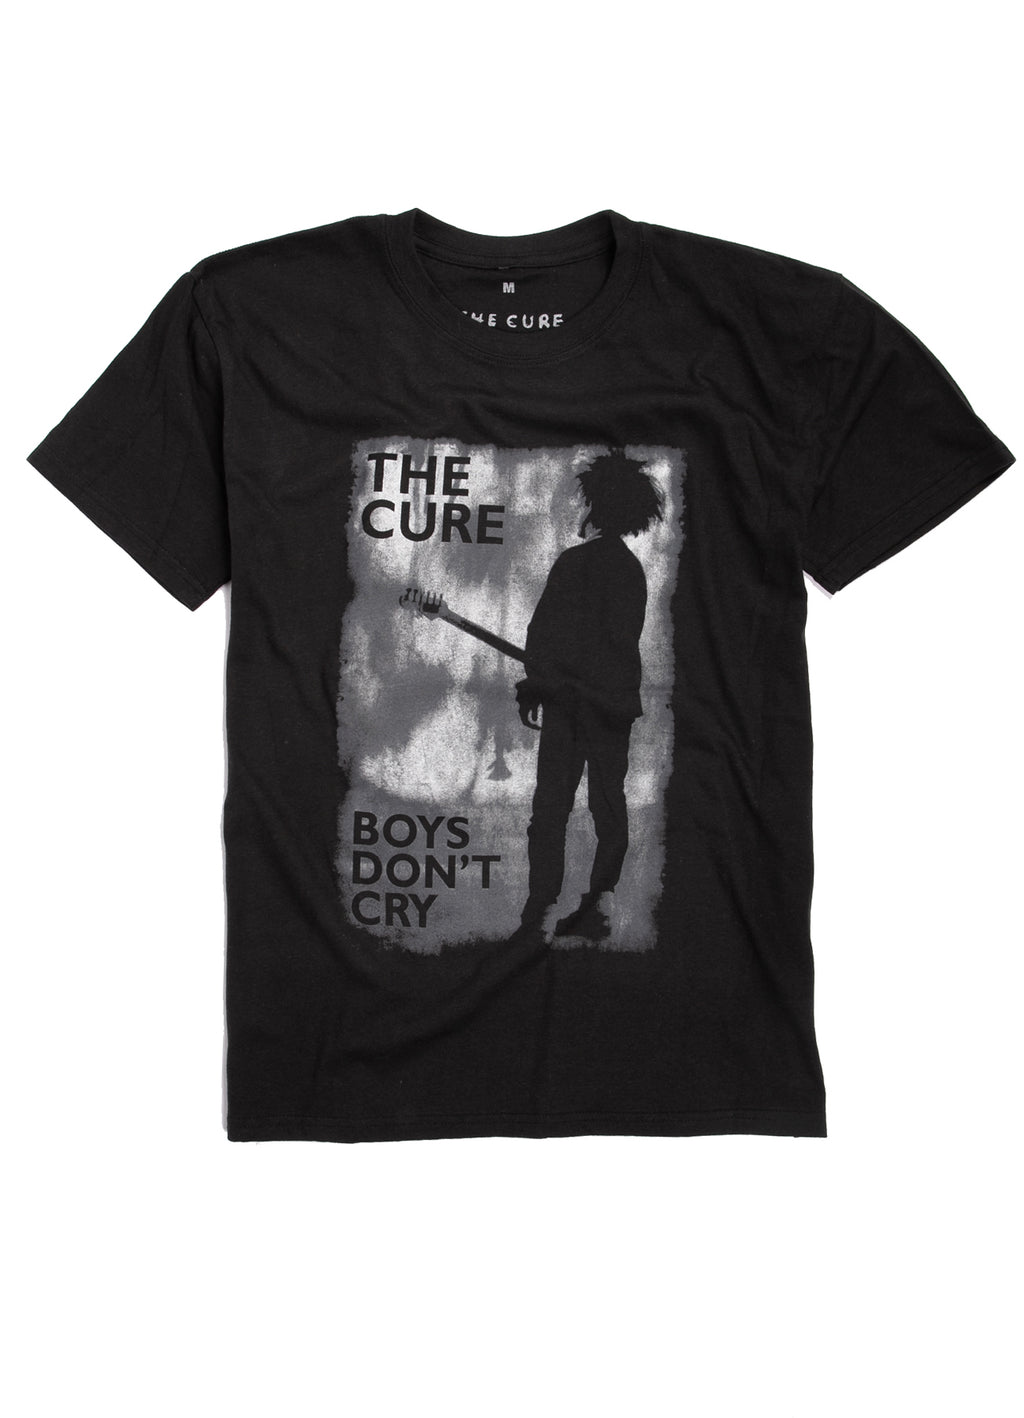 The Cure "Boys Don't Cry" t-shirt.